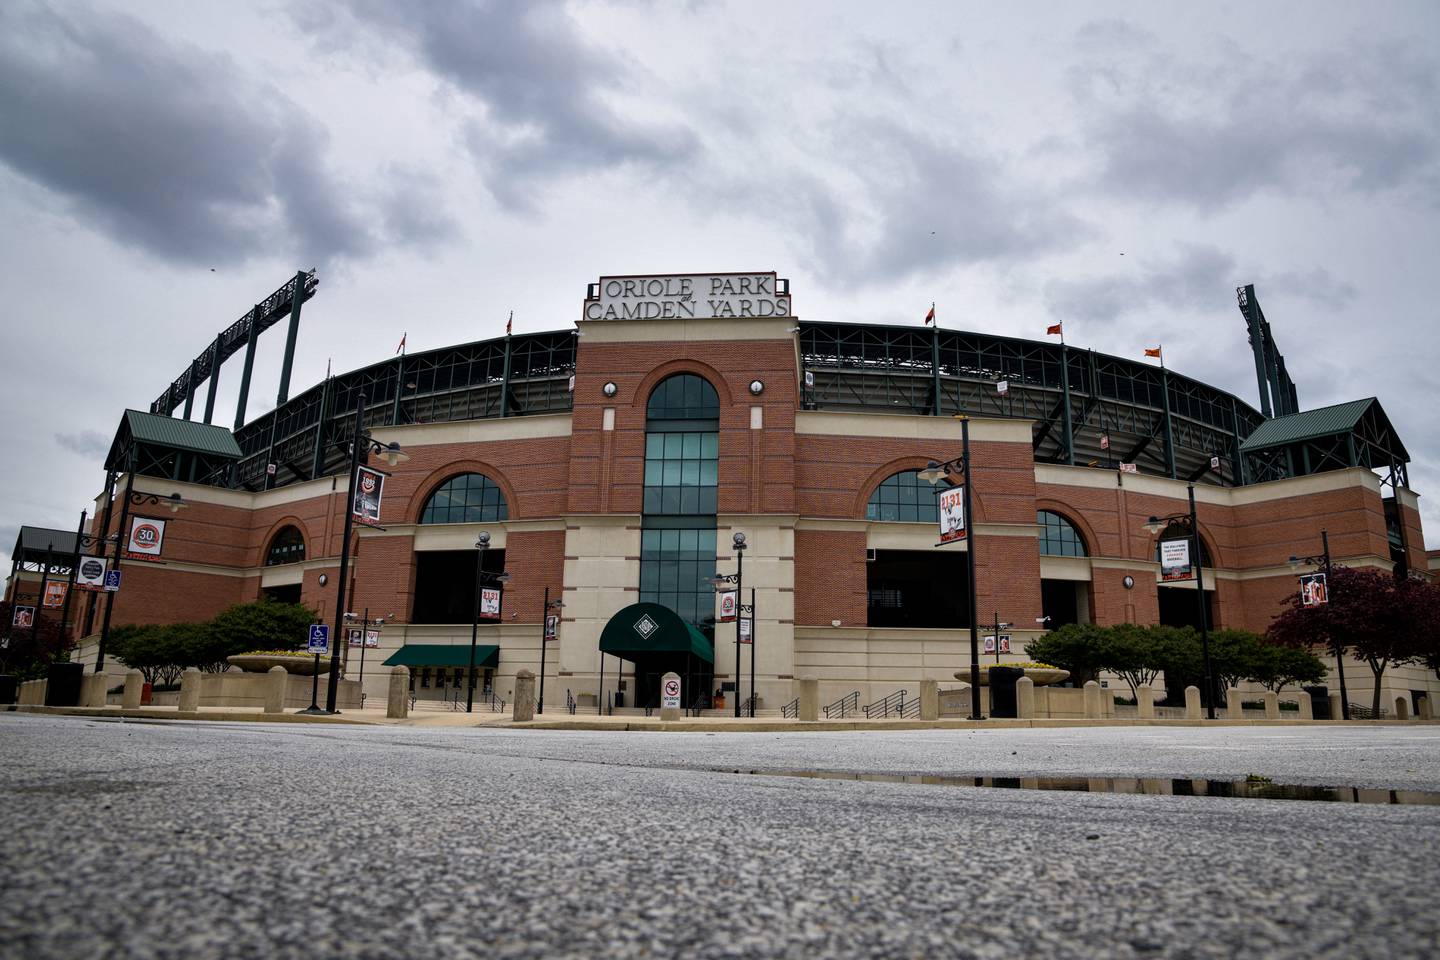 Too much foot-dragging' over stadium lease deal with Baltimore